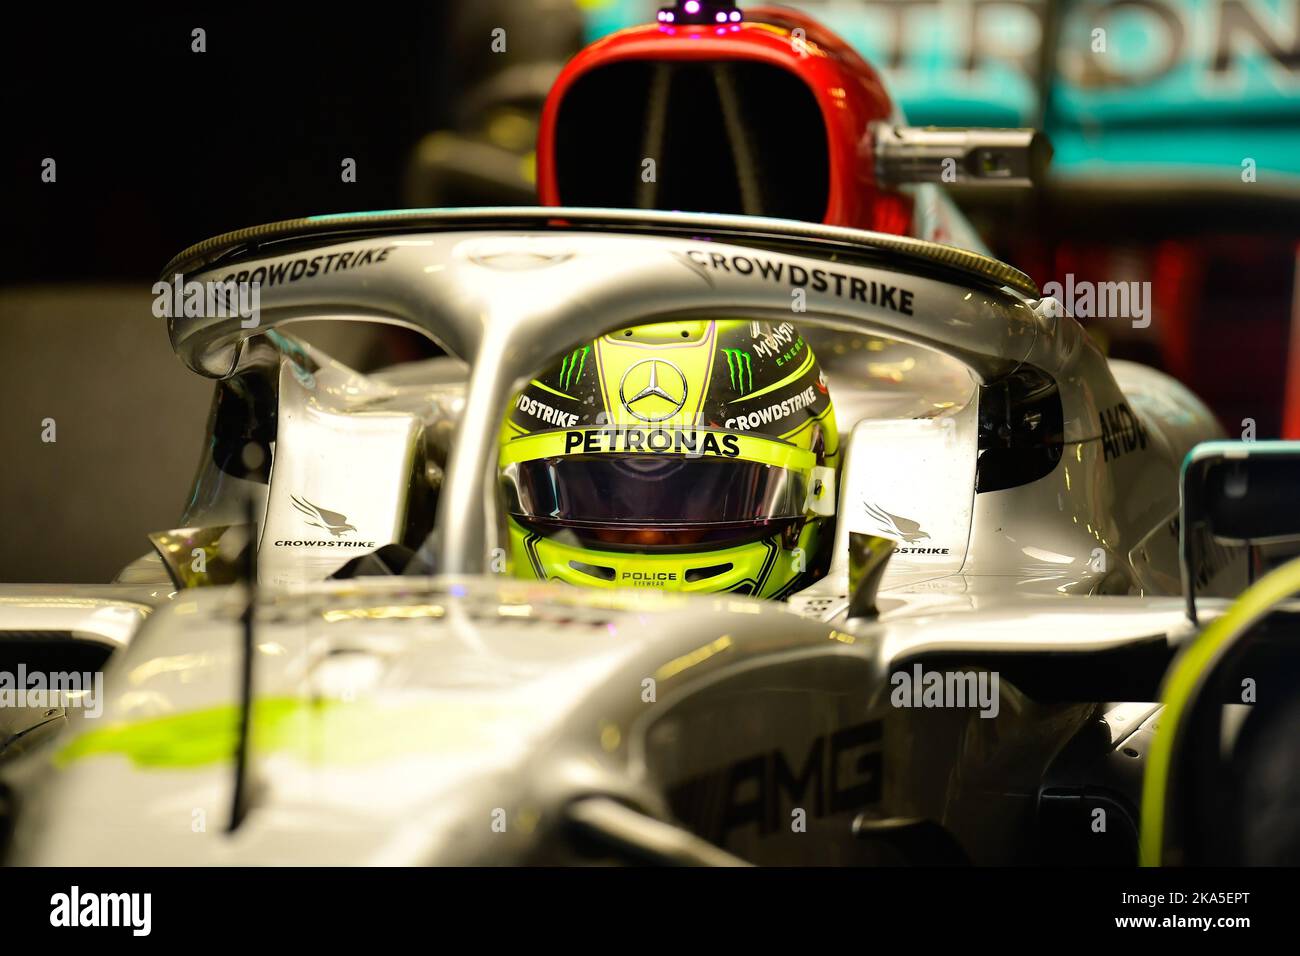 MEXICO City, MEXICO 28. October 2022: Lewis Hamilton of Great Britain (N-44) Mercedes AMG Petronas F1 Team W13 during practice 2 Day prior to the Formula 1 Grand Prix of Mexico 2022, at Autodromo Hermanos Rodriguez, on October 28, 2022. SPANISH TEXT - followed by English Lewis Hamilton de Gran Bretana (N-44) Mercedes AMG Petronas F1 Team W13 durante el dia de practicas 2 previo al Gran Premio de Mexico de la Formula 1 2022, en el Autodromo Hermanos Rodriguez, el 28 de Octubre de 2022. F1 Grand Prix held in the Magdalena Mixhuca Park in the Autodromo Hernando Rodriguez, Formula 1 Grand Prix Stock Photo